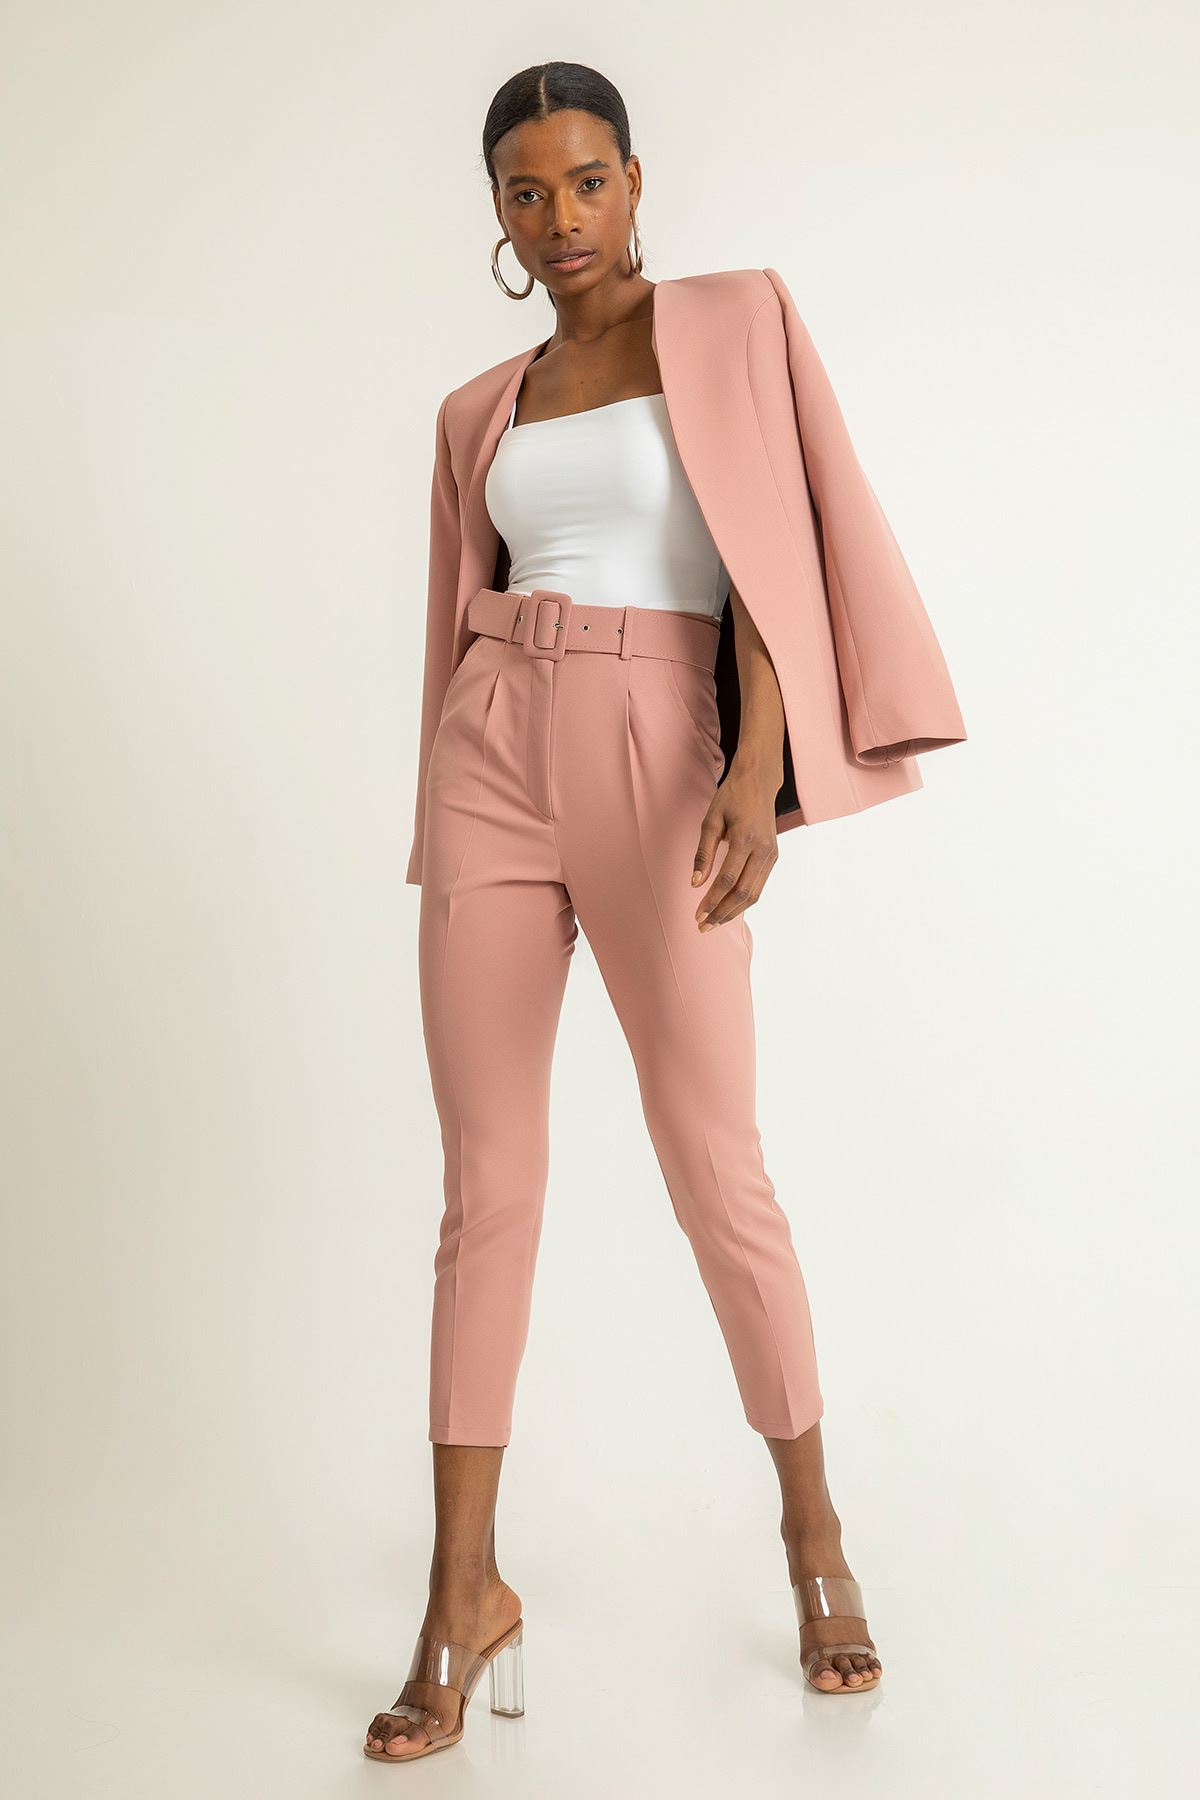 Atlas Fabric Ankle Length Tight Fit Women'S Trouser With Belt - Light Pink